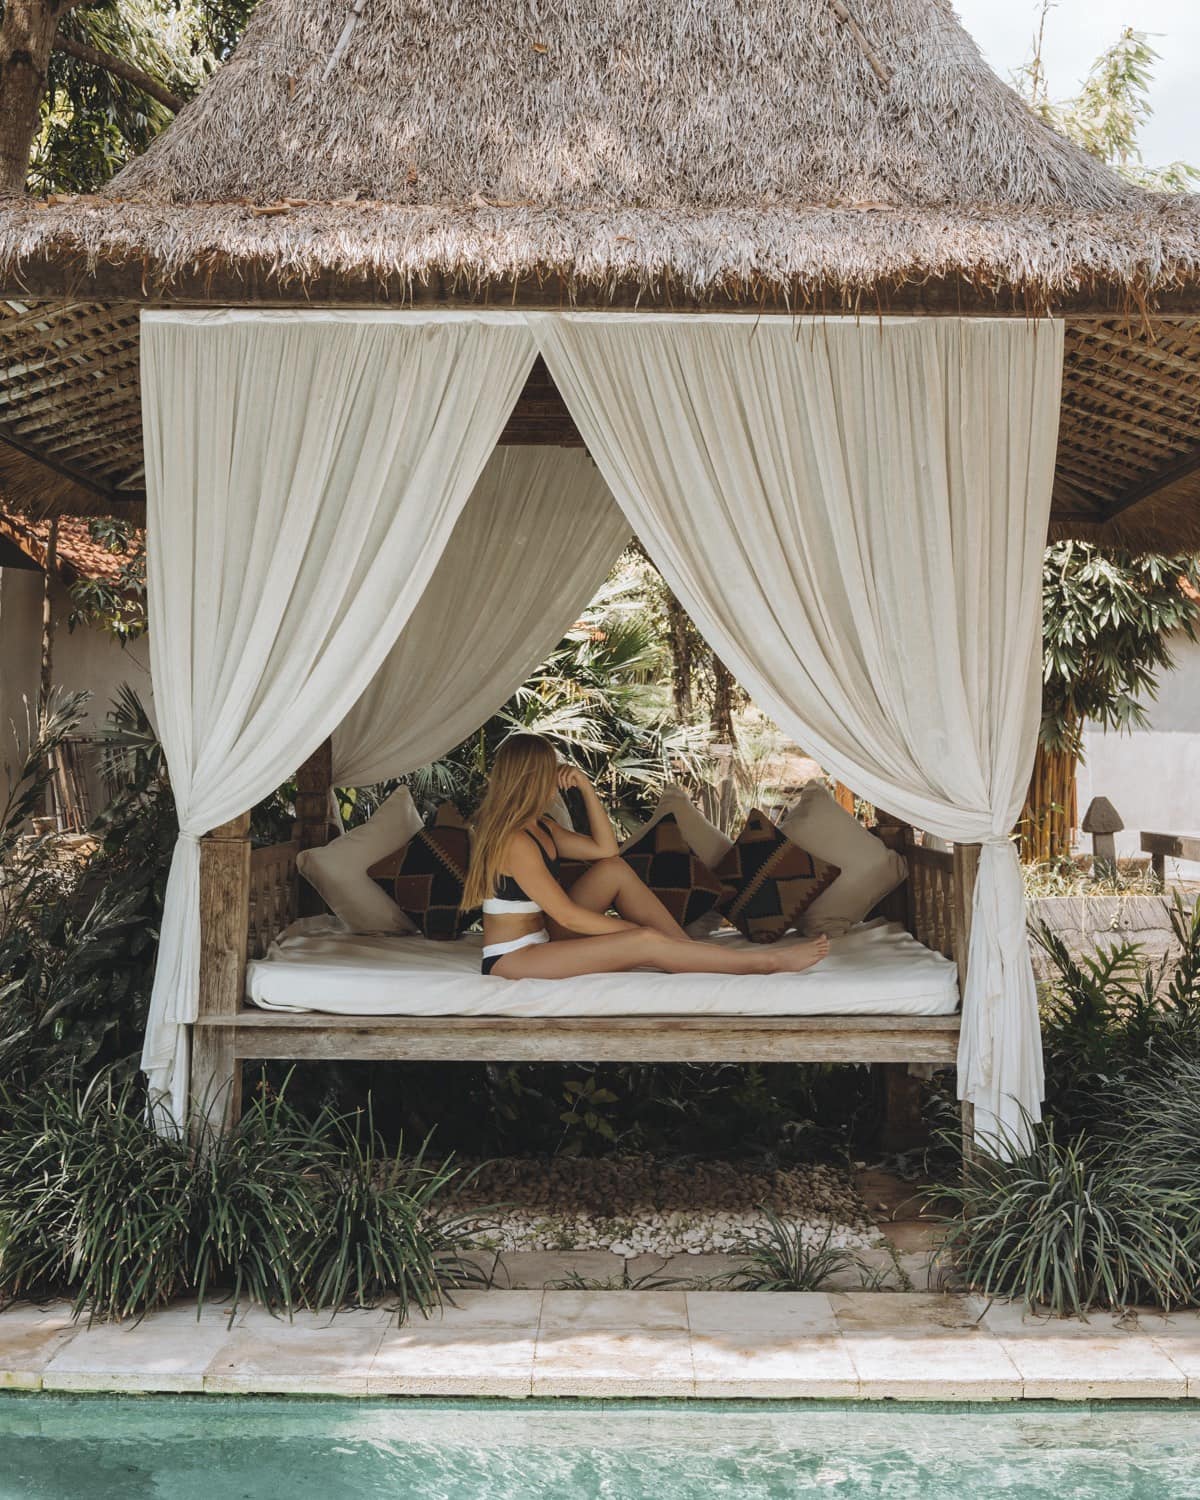 Kicking Off Summer in Bali with Athleta